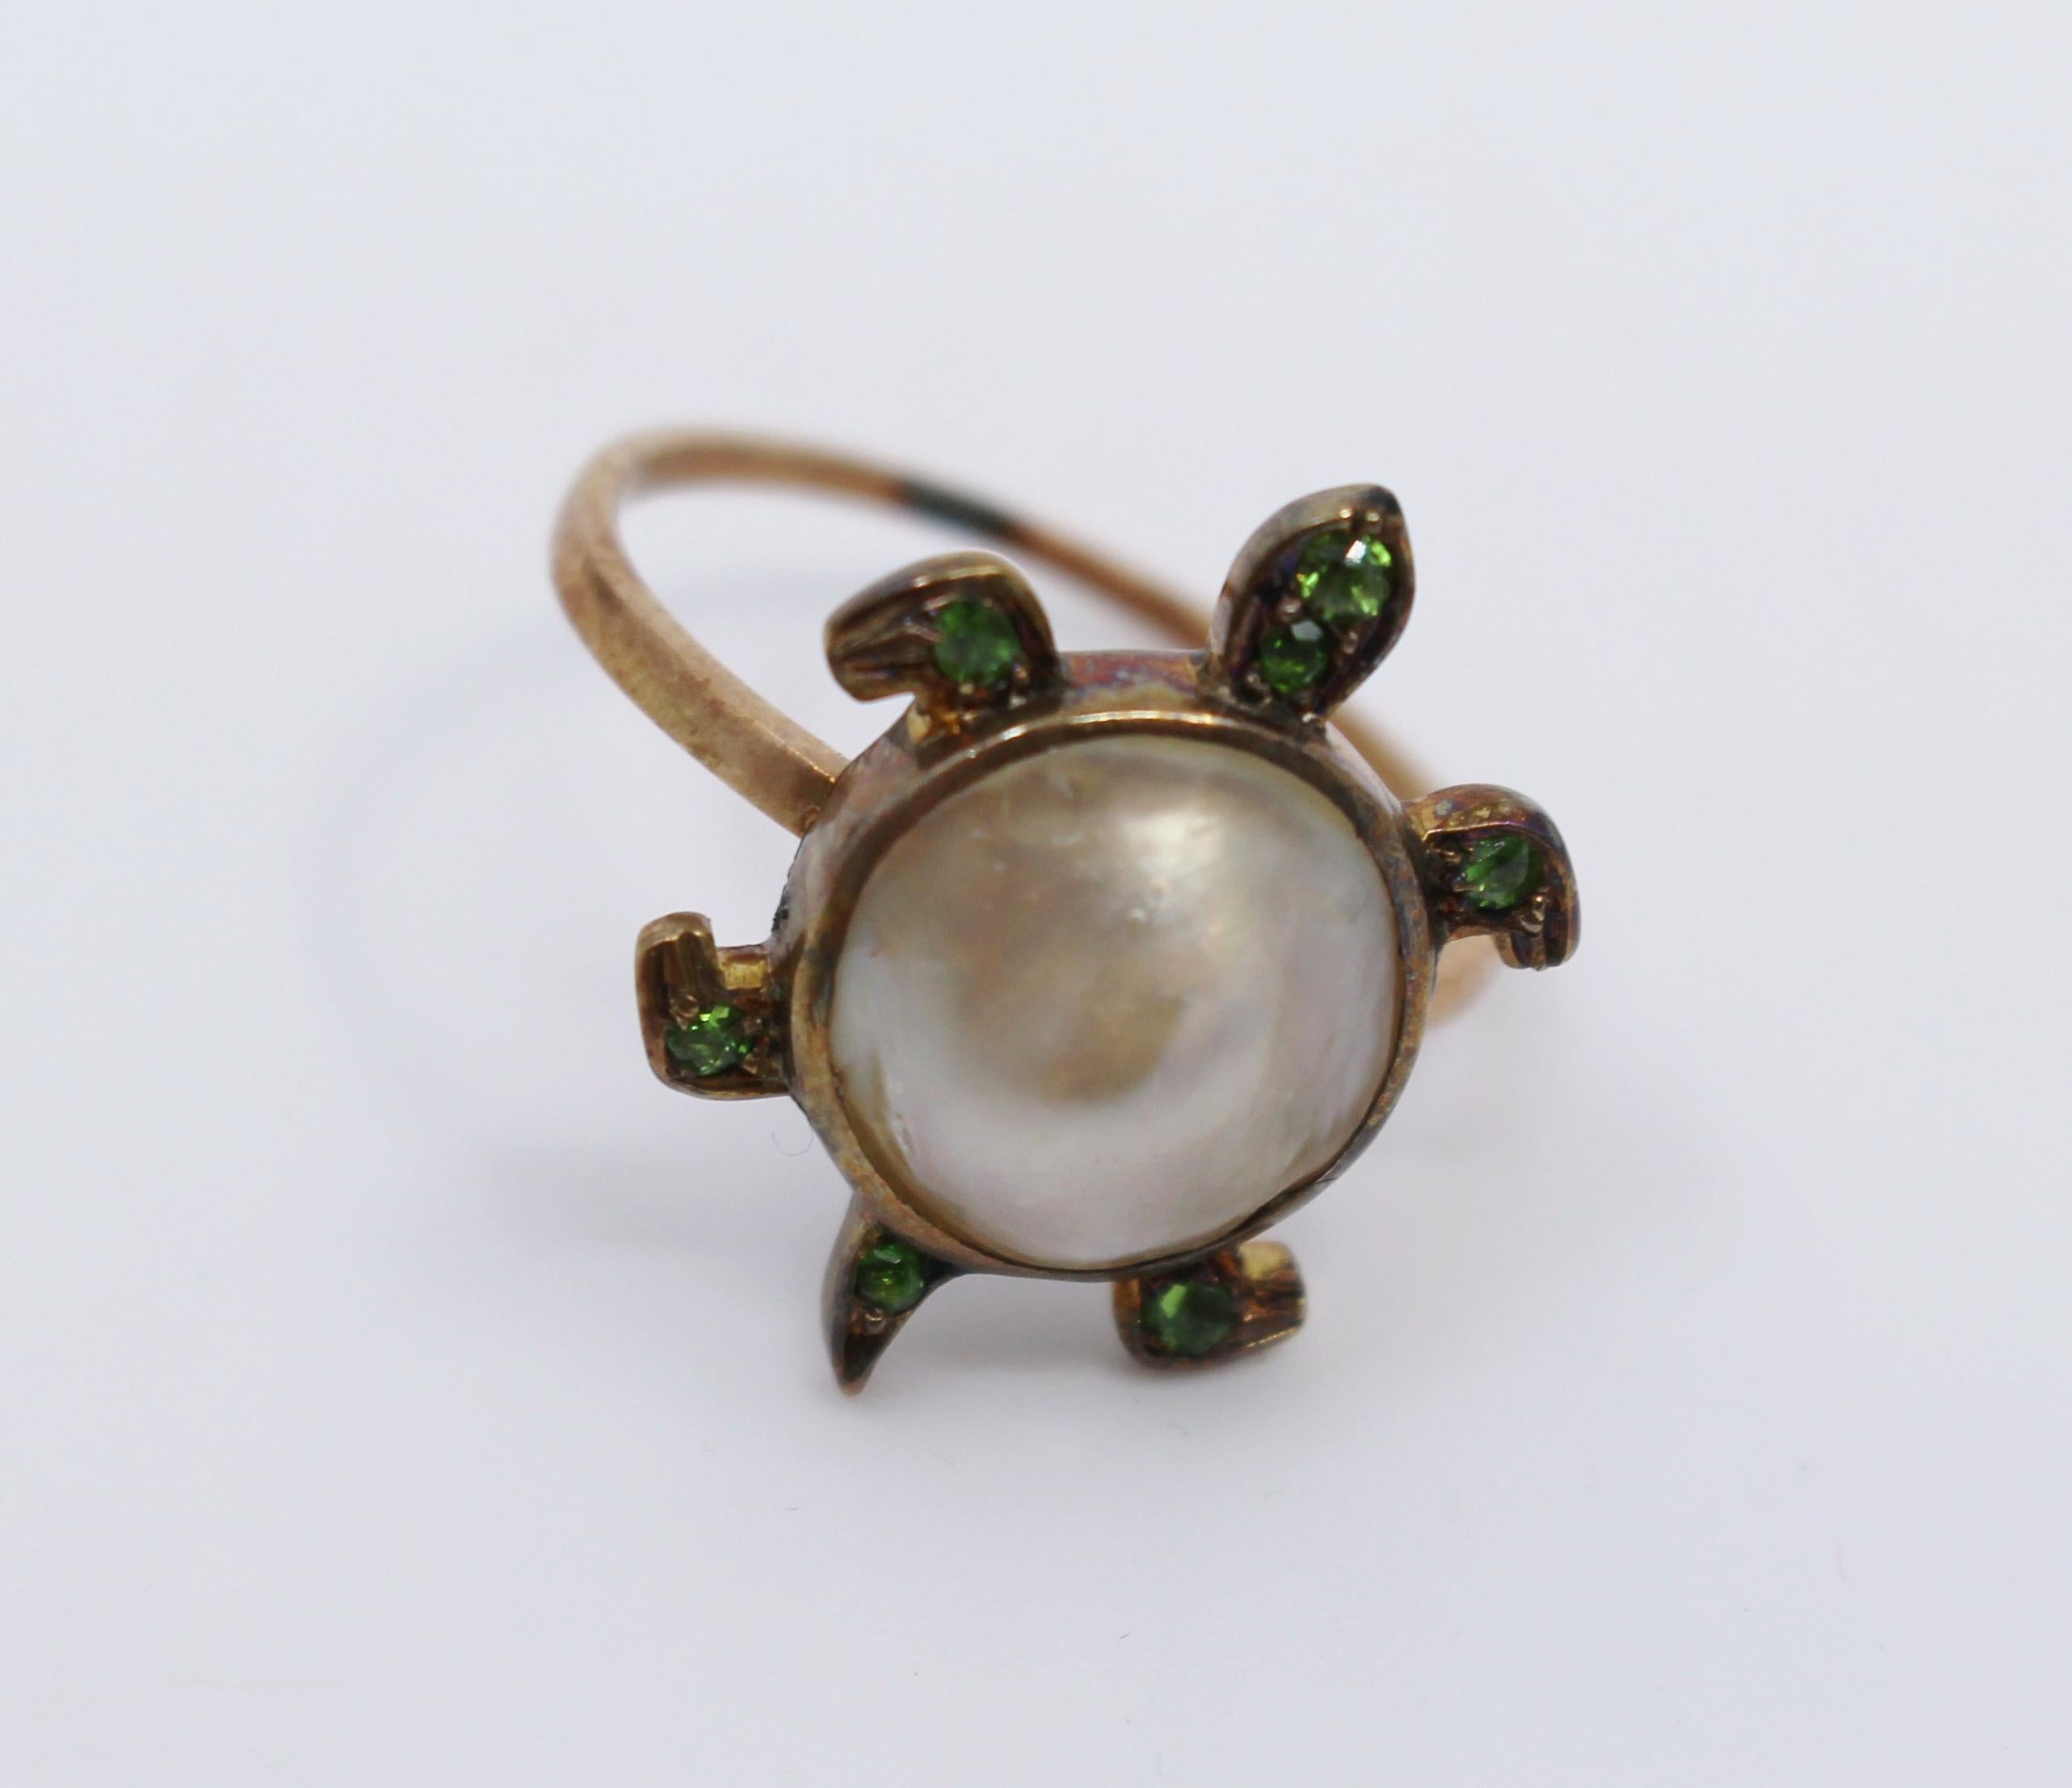 Period circa 1900
Composition 18-carat rose gold, pearl and demantoid garents
Weight 3.1 g
Ring size O 1/2 (British), 7.75 (US)
Condition: Good condition commensurate with age. Gold without hallmark, testing as 18-carat.
 

 

Very unusual